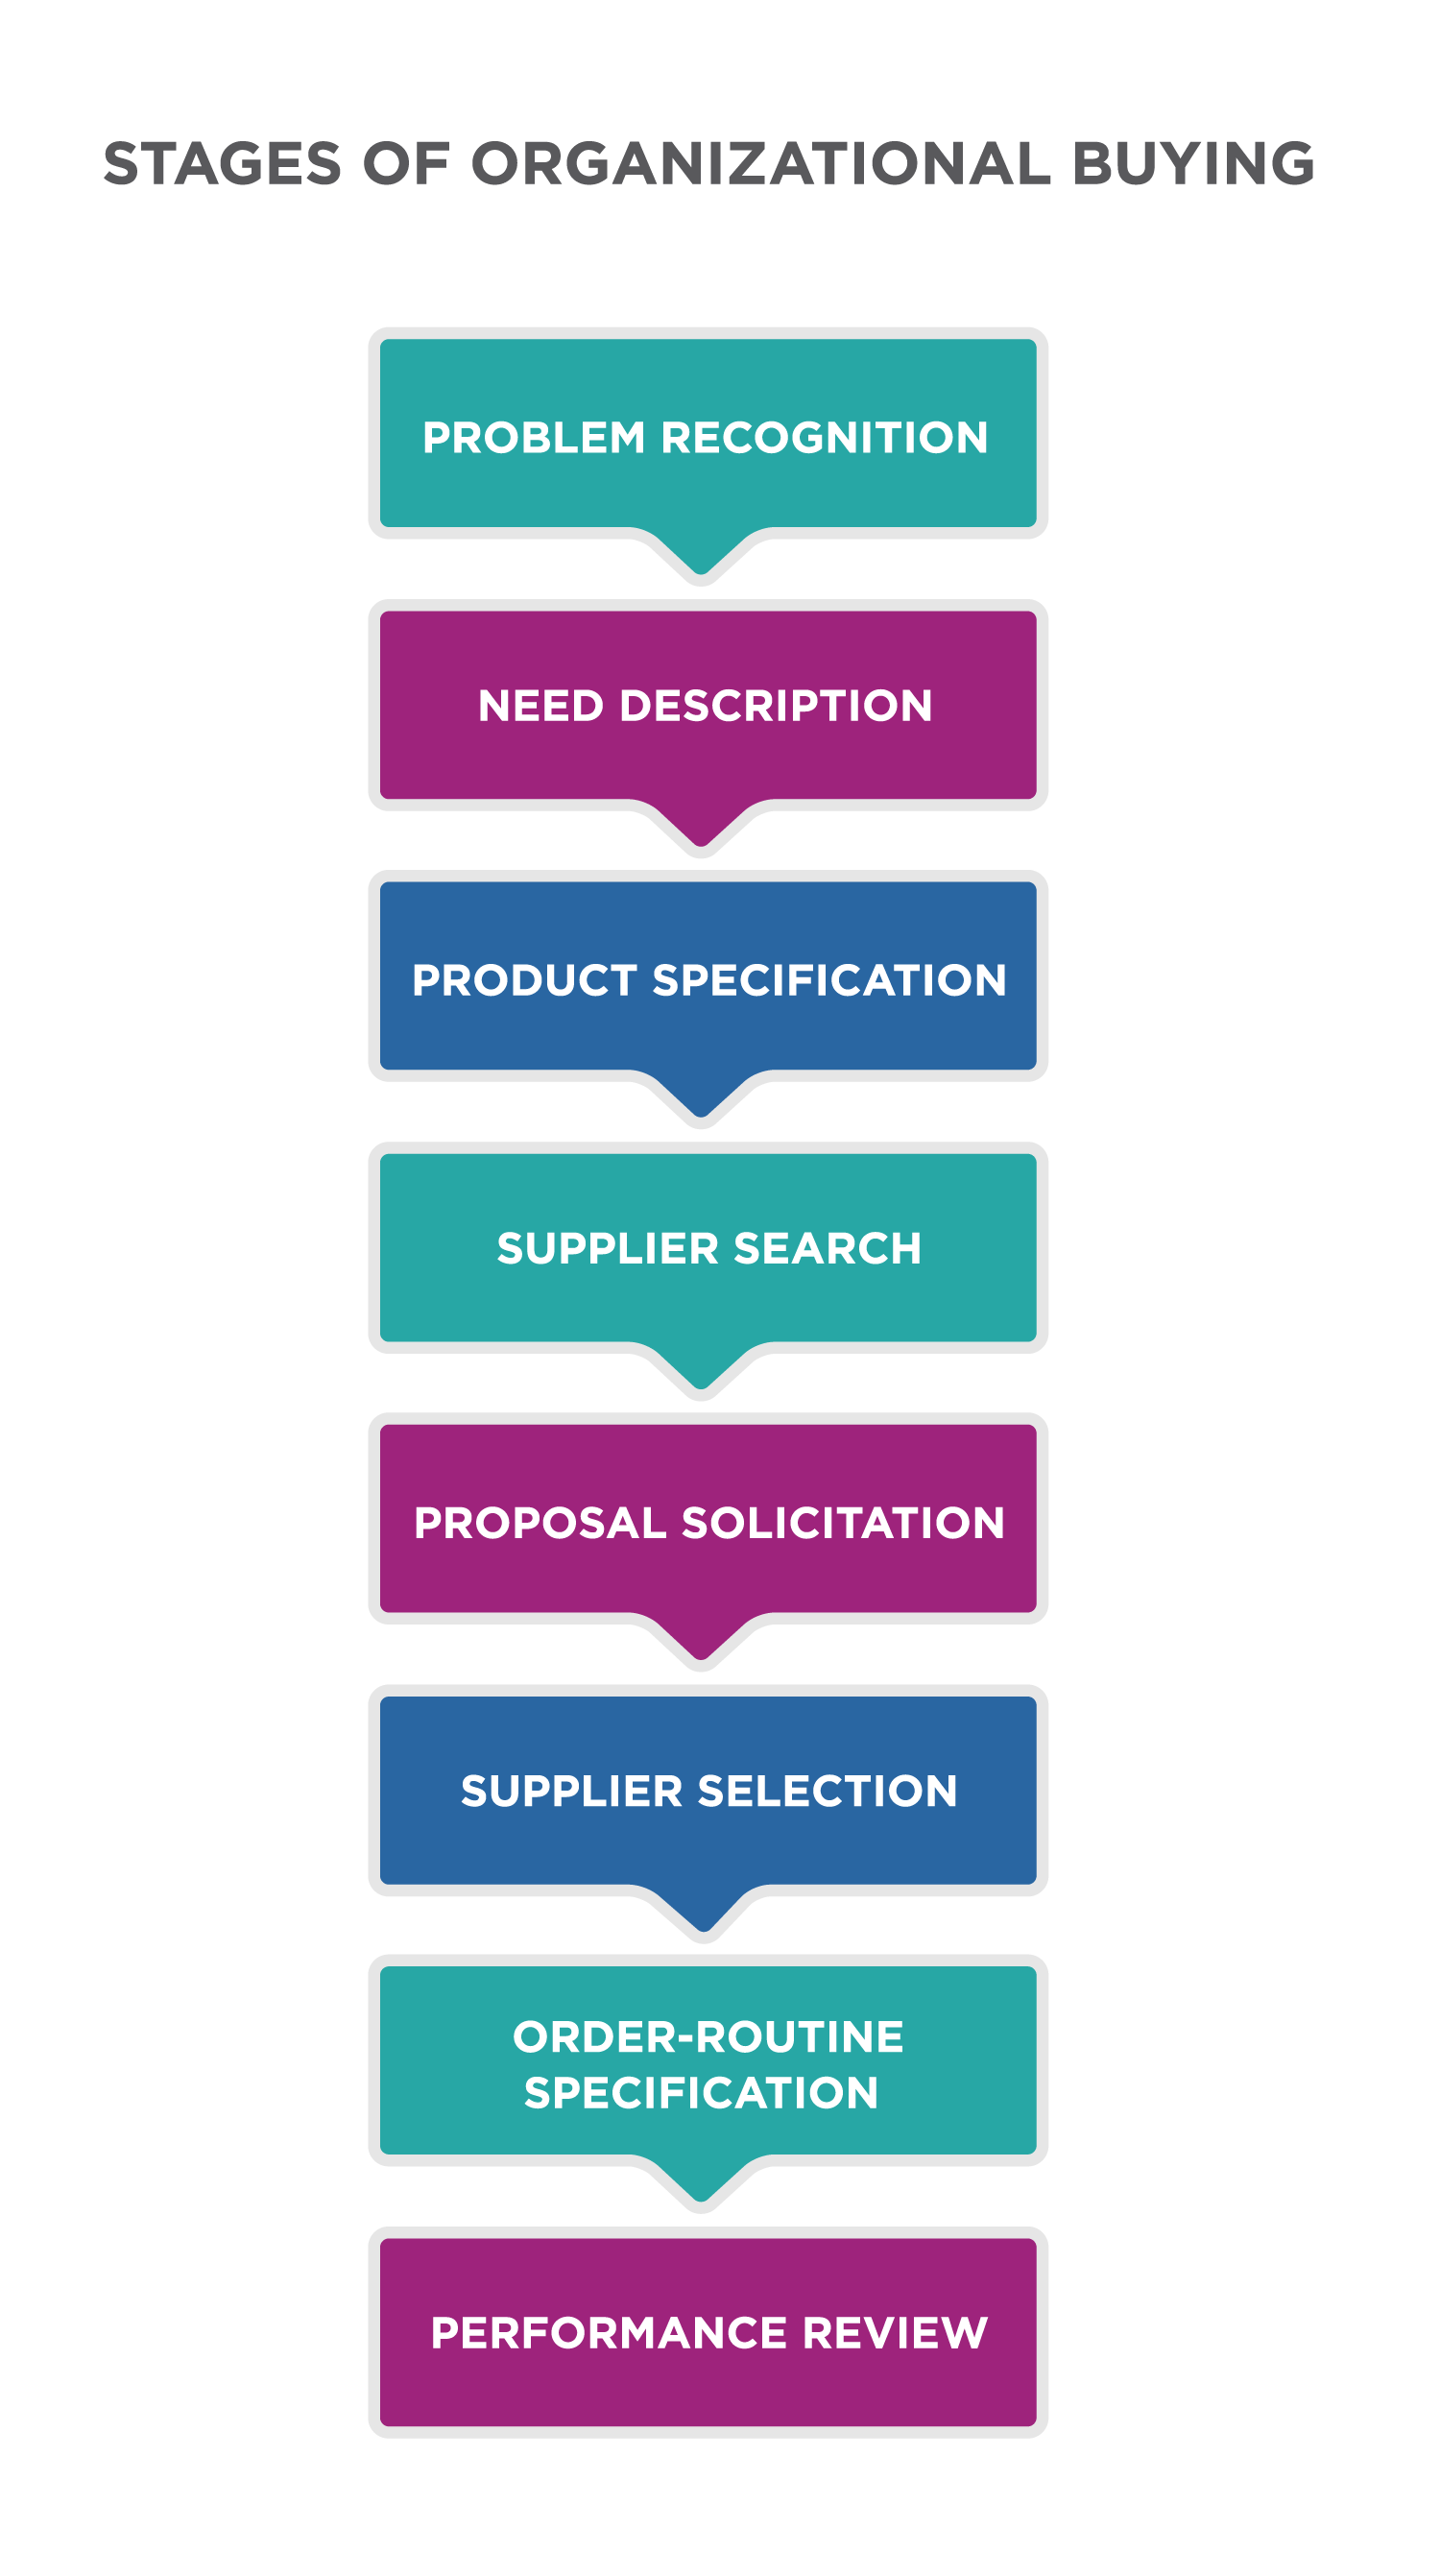 Chart titled: Stages of Organizational Buying. There are eight stages in this flowchart. Problem recognition leads to need description, which leads to product specification, which leads to supplier search, which leads to proposal solicitation, which leads to supplier selection, which leads to order-routine specification, which leads to performance review.